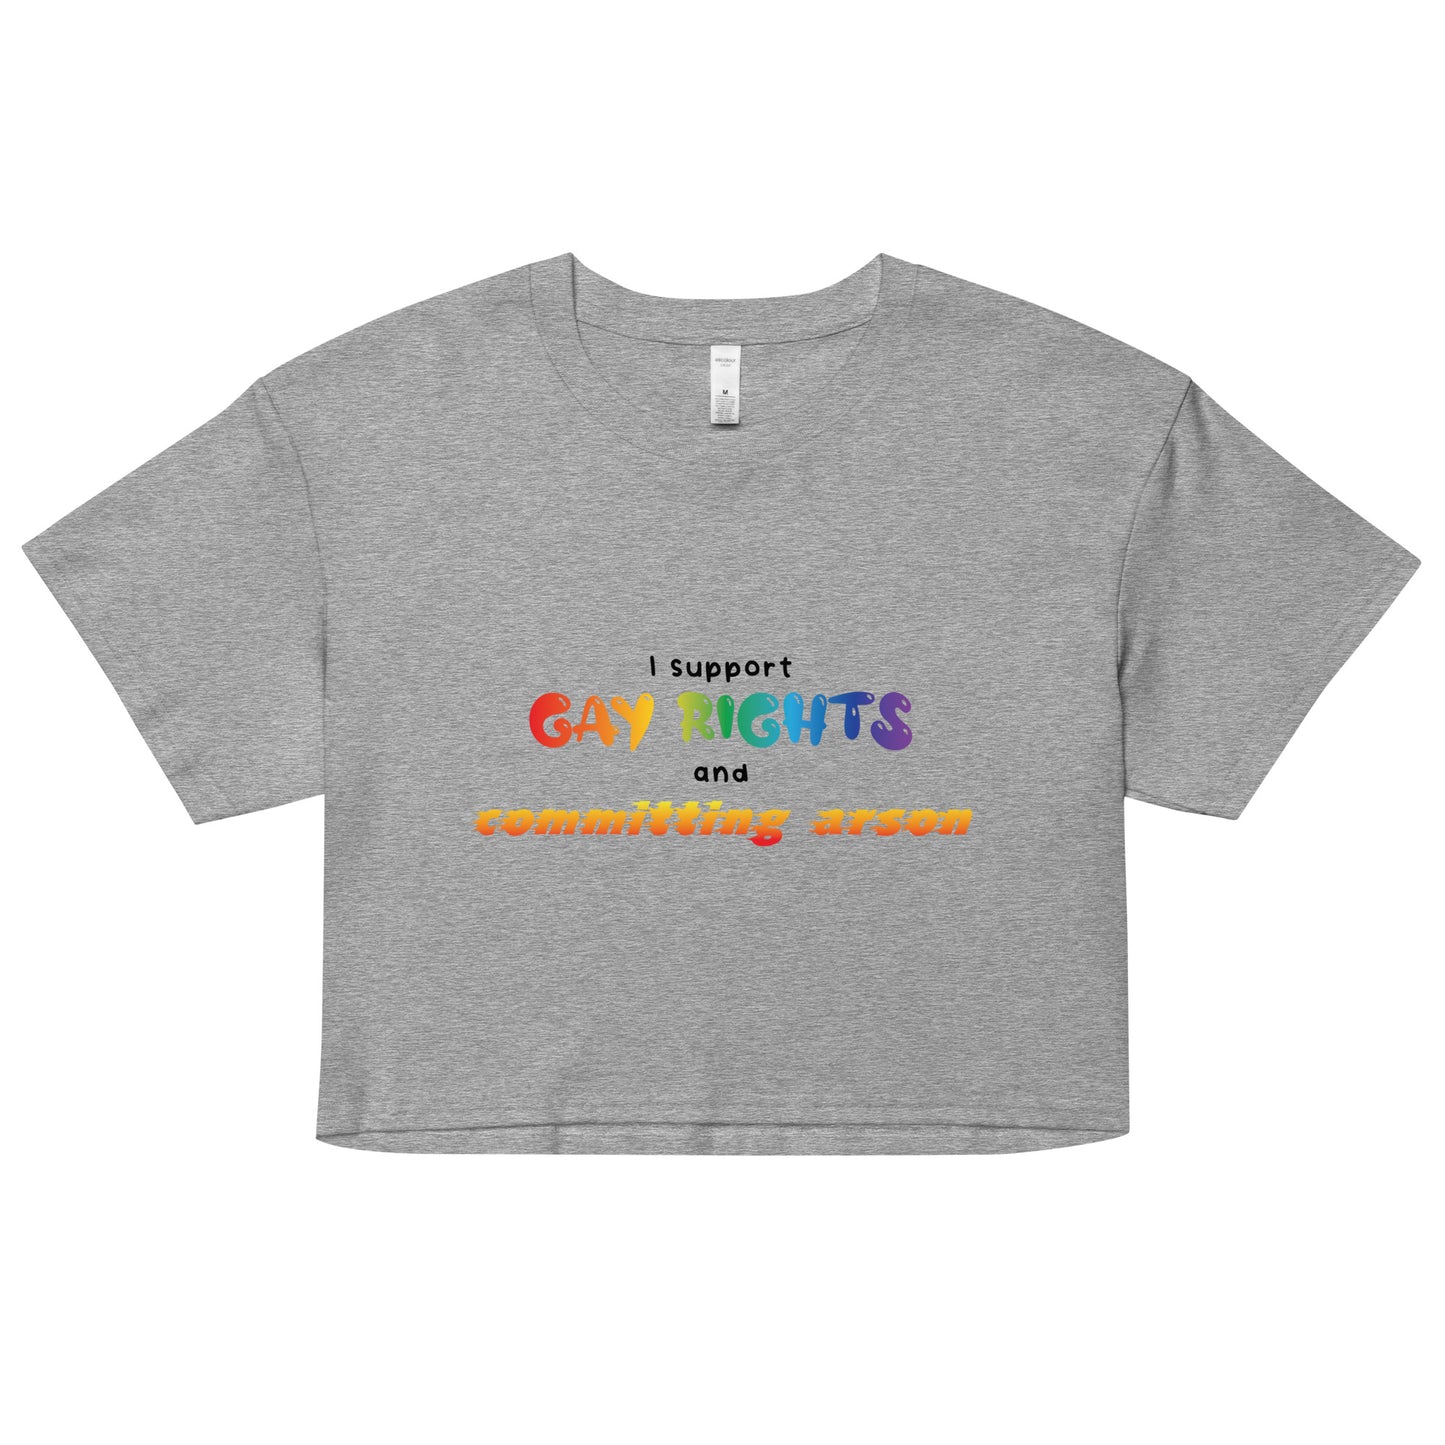 Gay Rights and Committing Arson Women’s crop top